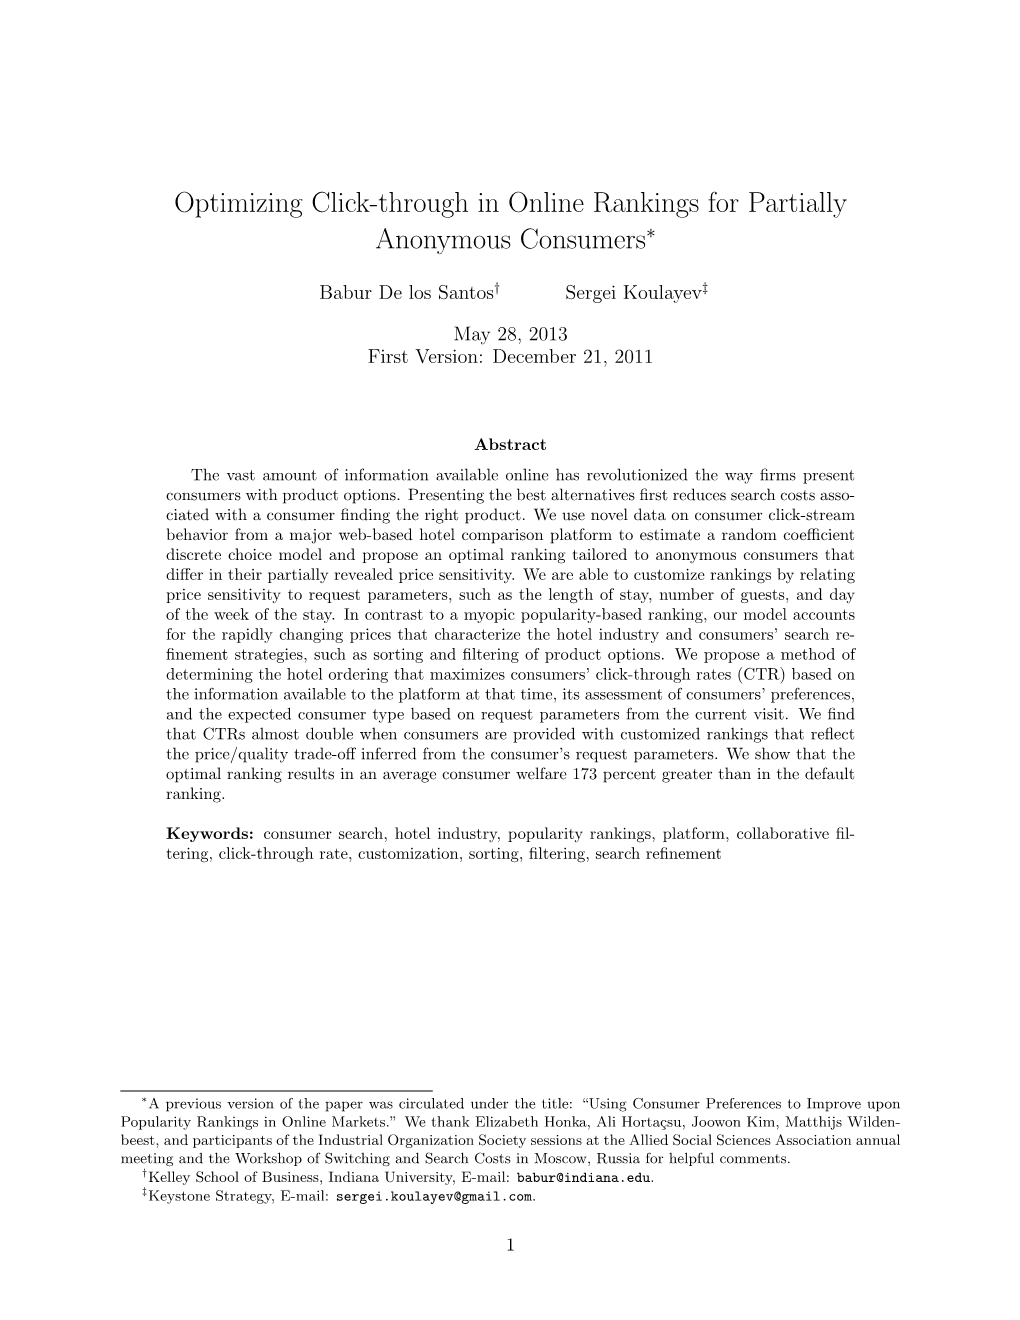 Optimizing Click-Through in Online Rankings for Partially Anonymous Consumers∗